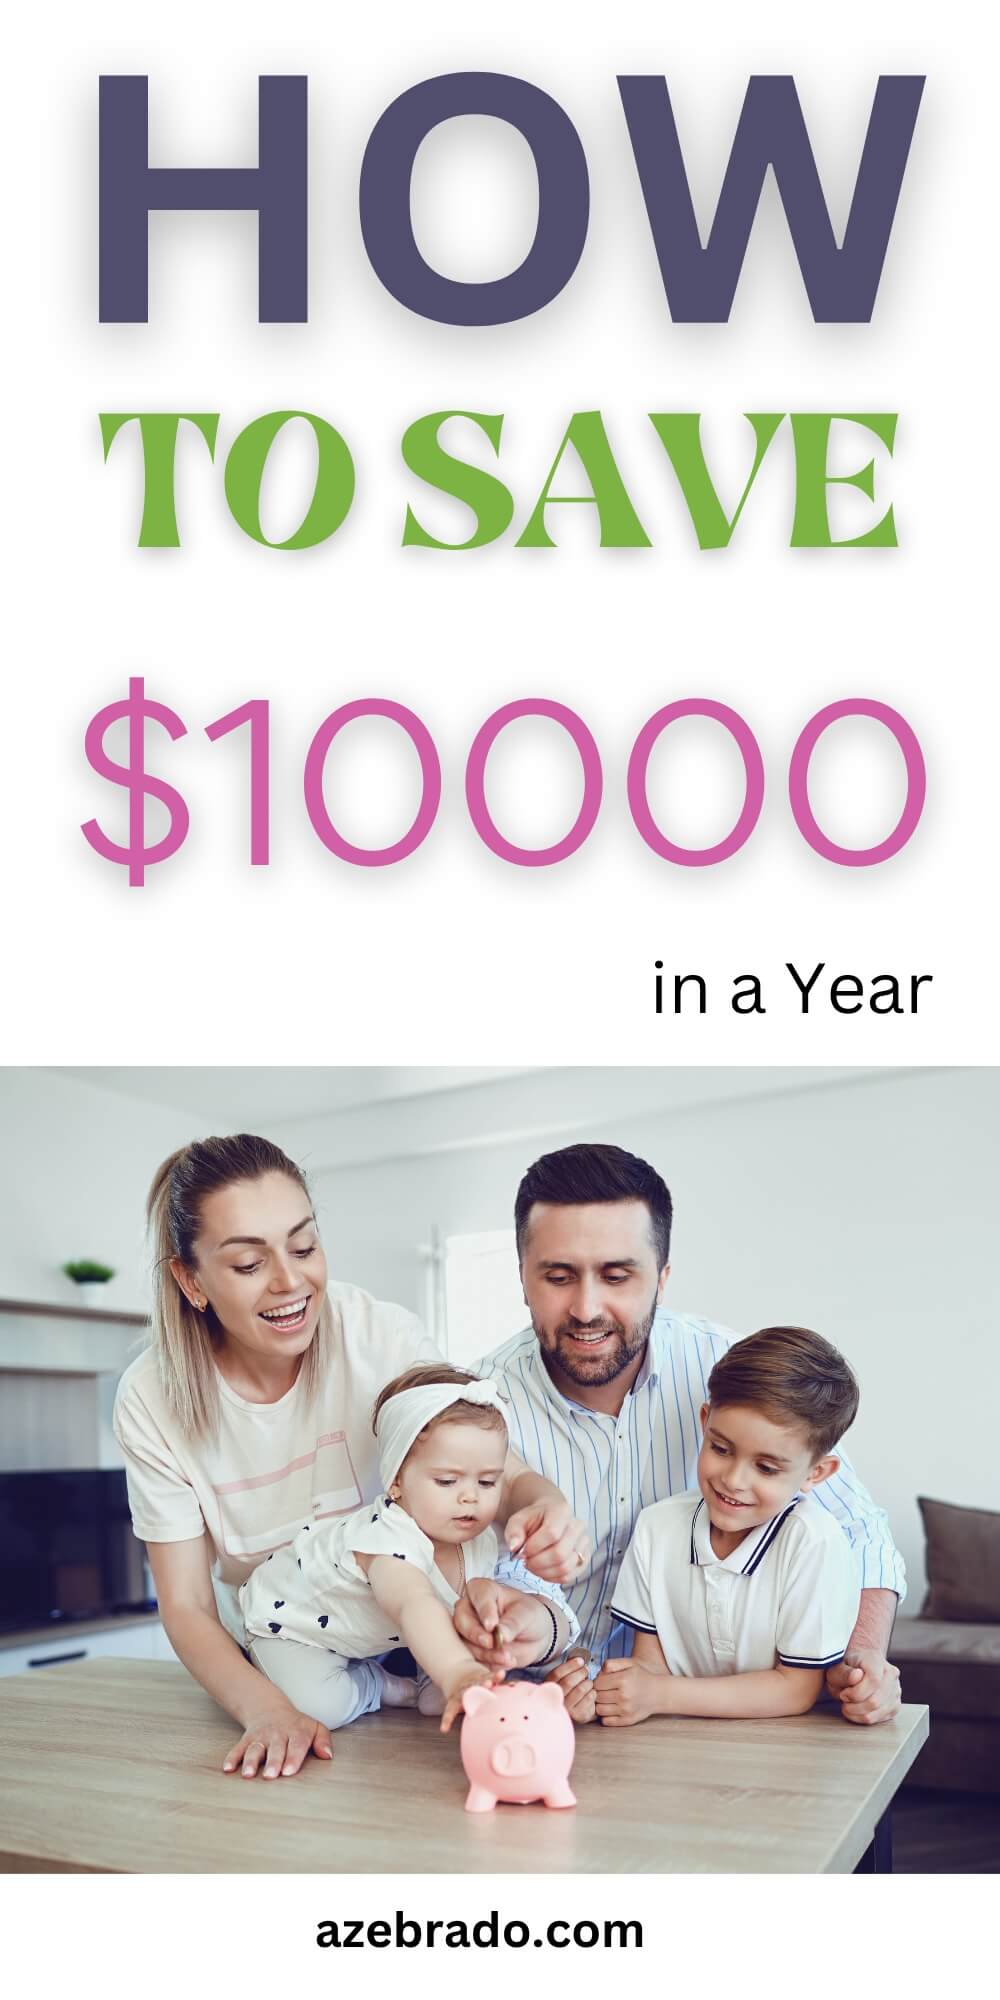 How to Save $10000 per year